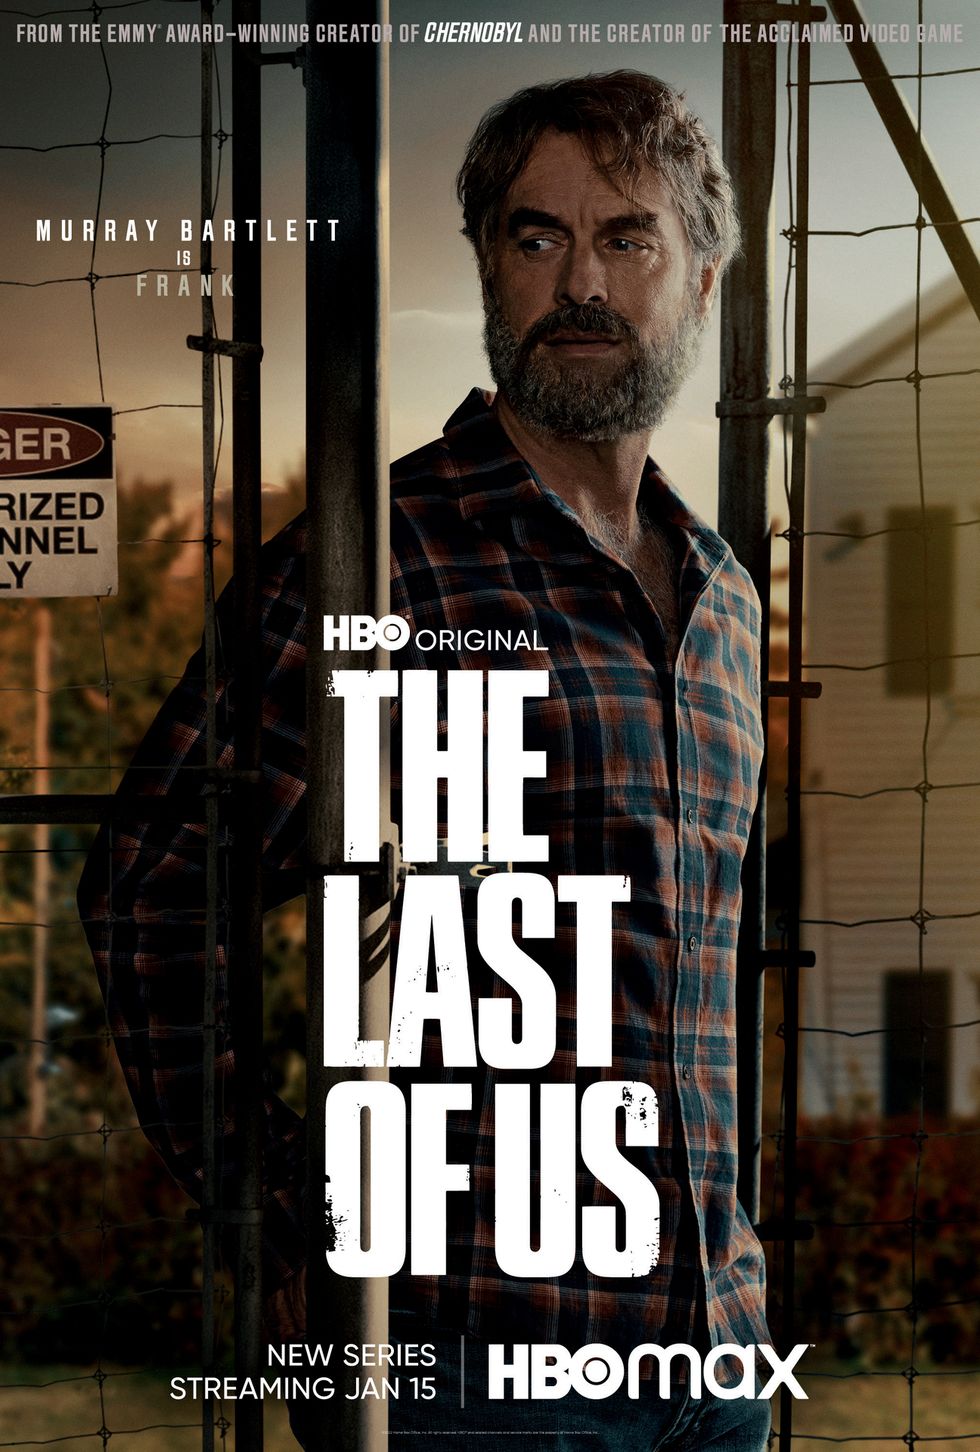 murray bartlett is frank hbo the last of us